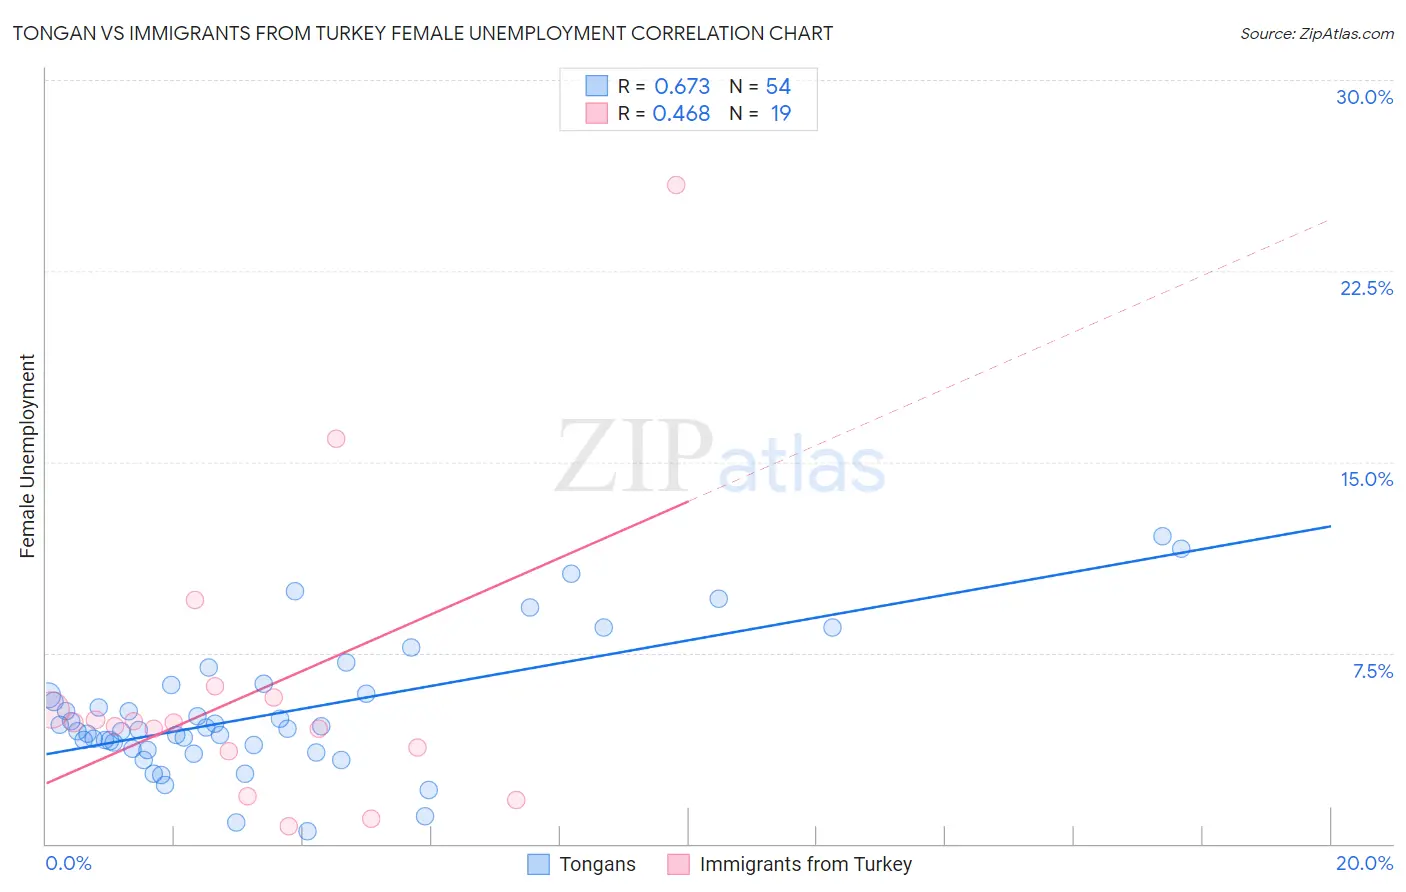 Tongan vs Immigrants from Turkey Female Unemployment